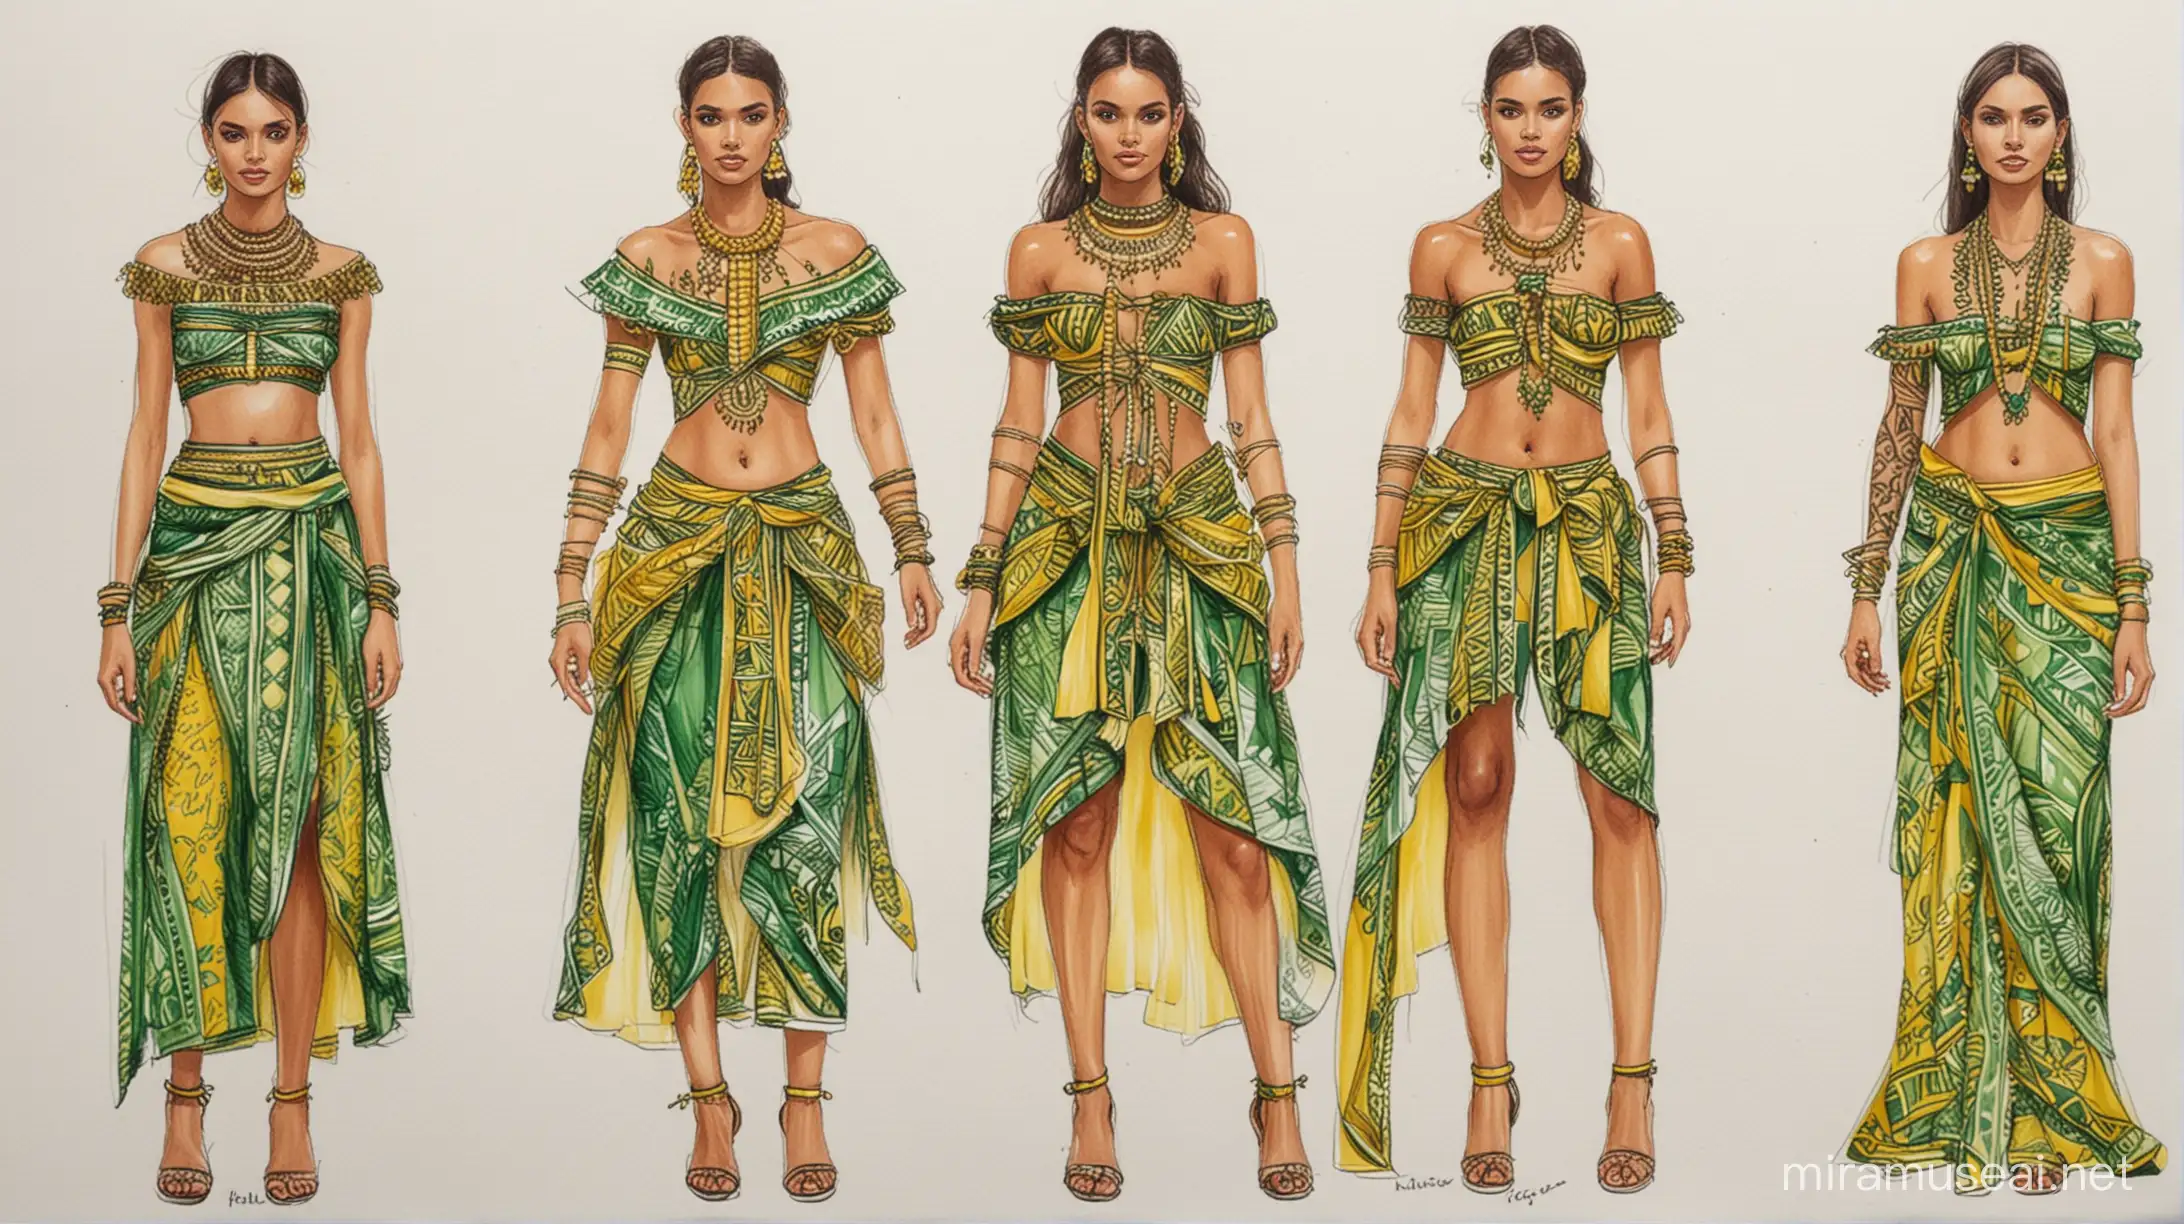 Fashion sketches for fashion collection inspired by the Hiva Oa ethnic group from Marqueesas islands - green and yellow motives 